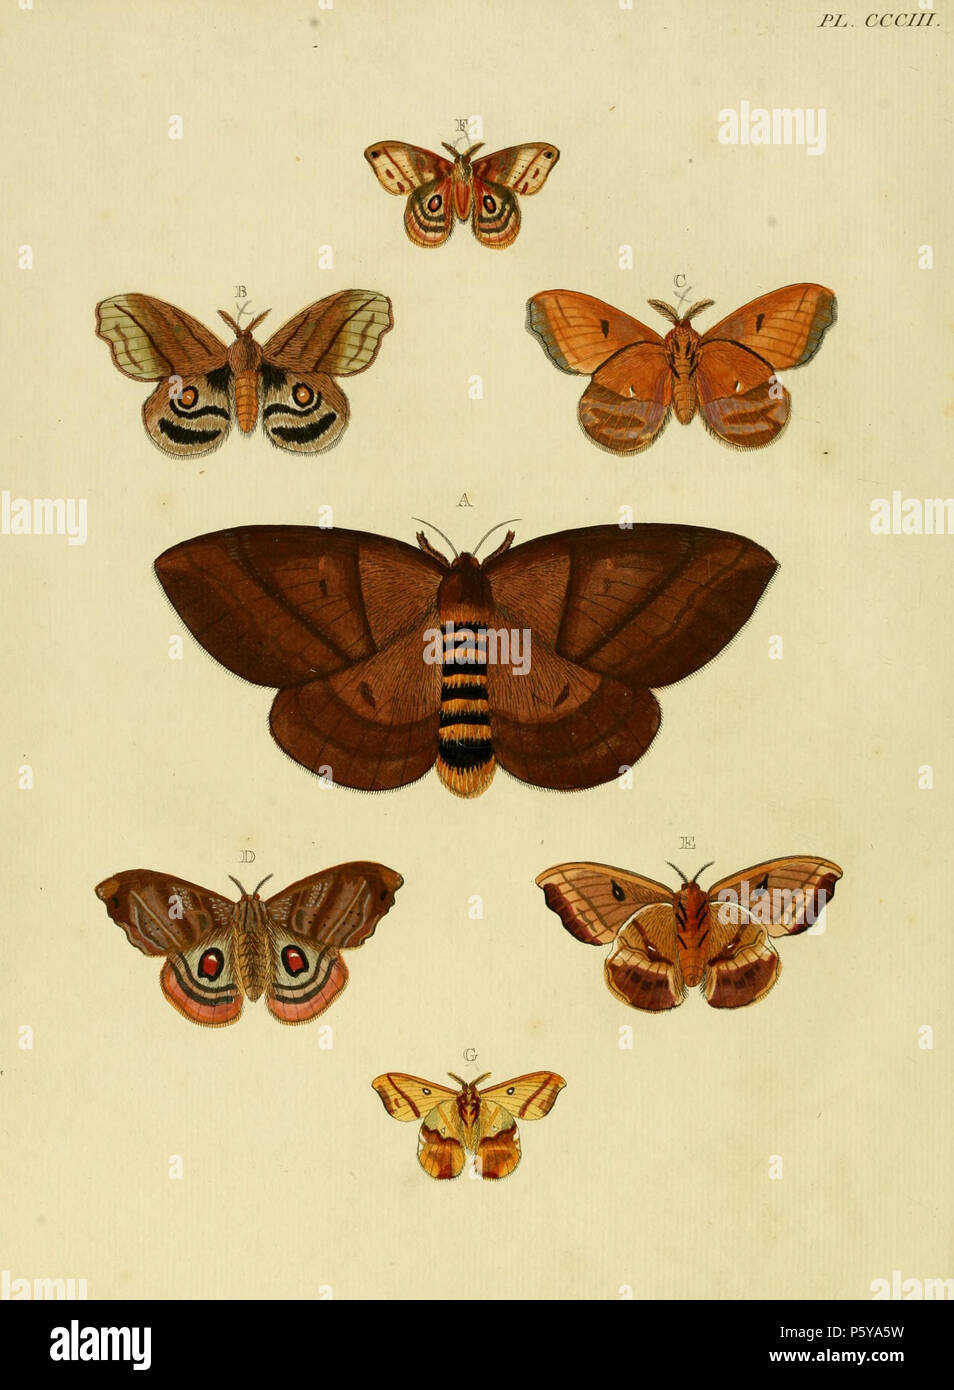 N/A. Plate CCCIII Warning: some taxa/names may be misidentified/misapplied or placed in a different genus.  A: '(Phalaena) Calchas' ( = Dirphia calchas (Cramer 1780), iconotype, see The Global Lepidoptera Names Index, NHM).  B, C: '(Phalaena) Nausica' ( = Hyperchiria nausica (Cramer, [1779]), see Funet). Photos at Barcode of Life.   In register spelled 'Nauzica' Also on pl 249, D, E.   D, E, F, G: '(Phalaena) Jo' ( = () Automeris io (Fabricius, 1775) see Funet). Photos at Butterflies and Moths of North America. Not found in Lepindex, not in Funet as Phalaena Io.  . 1779. Pieter Cramer (1721 -  Stock Photo